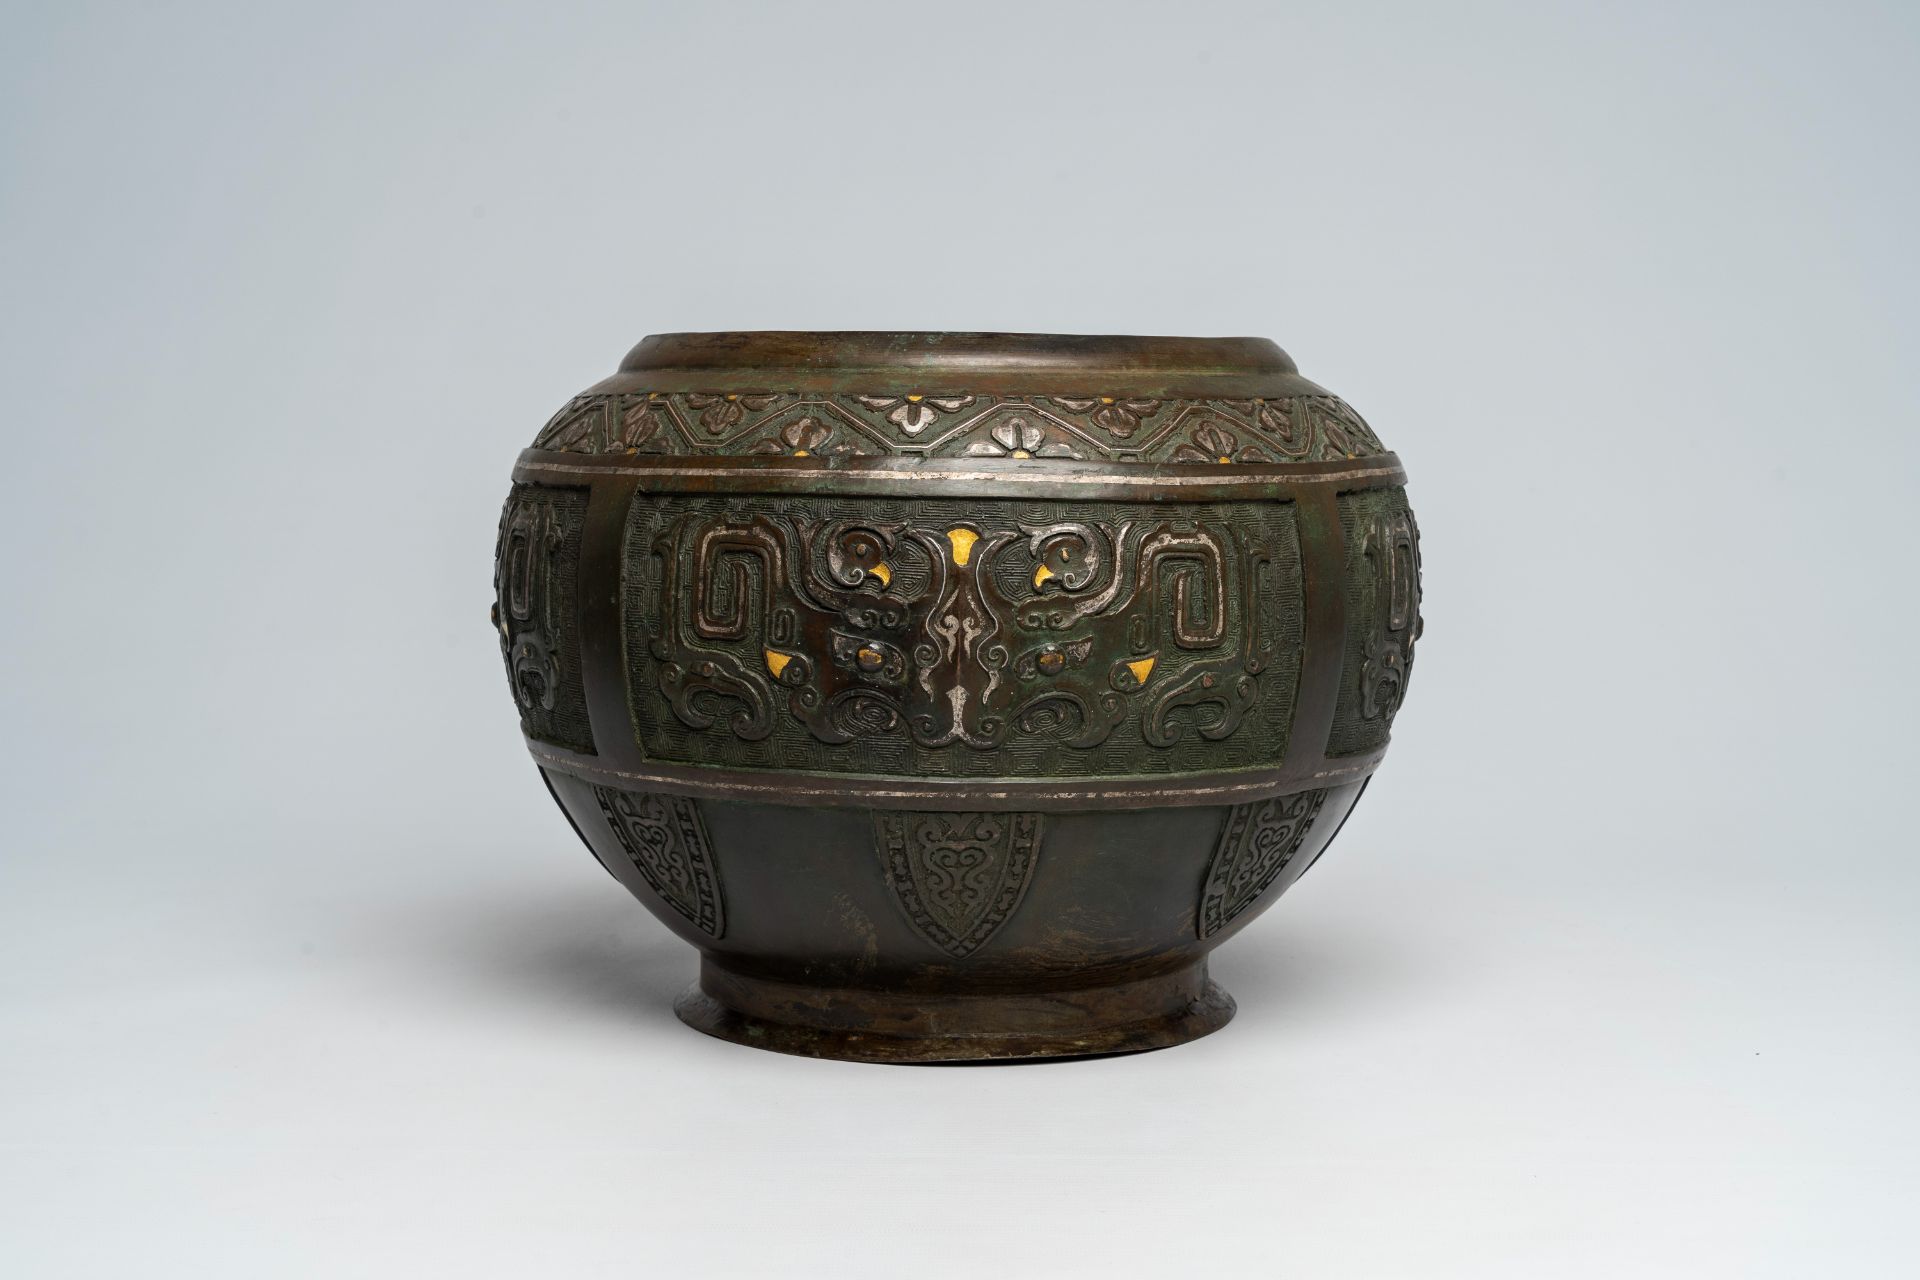 A Chinese gold- and silver-heightened archaic bronze vase, 19th C. - Image 3 of 7